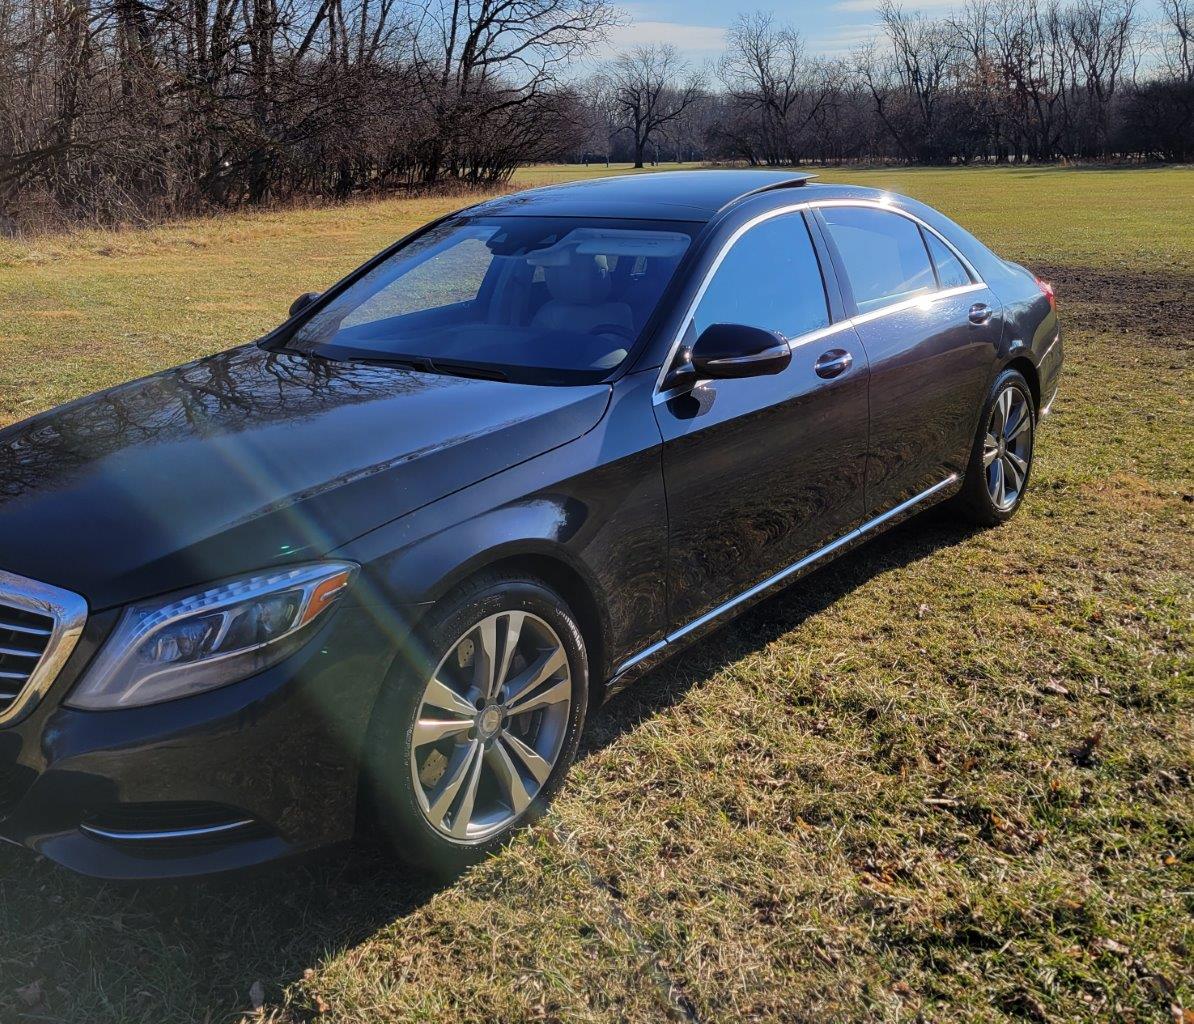 2017 Mercedes-Benz S-Class S 550 4MATIC Sedan with Premium Package, Rear seat Package, Comfort and Surround view driver's assistance. Pano Roof